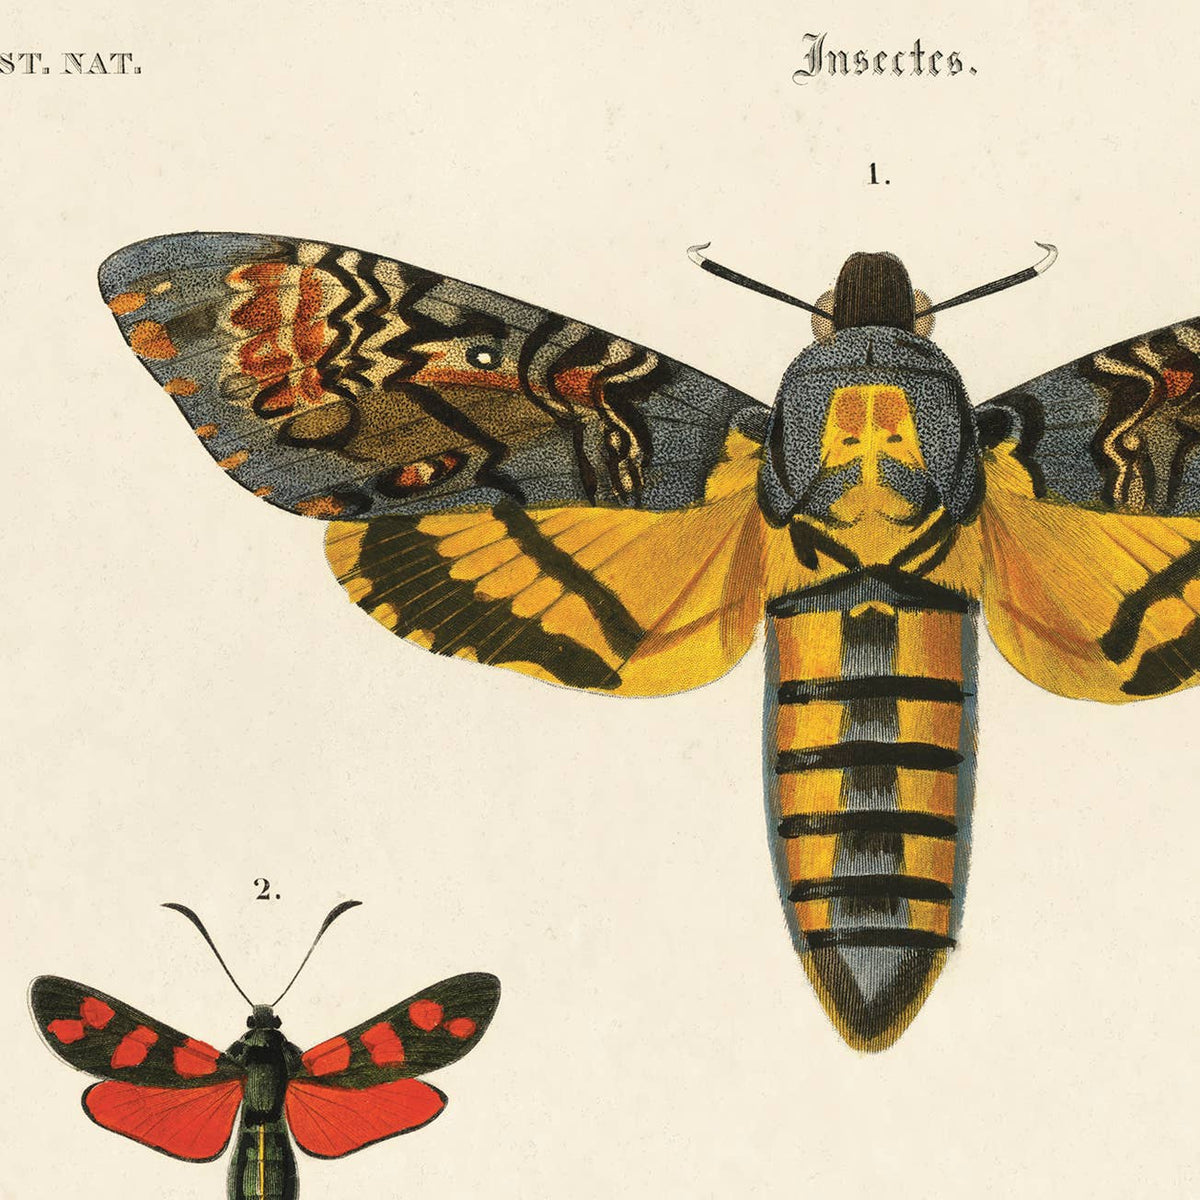 Curious Prints Vintage d'Orbigny Sphinx Moth Insect Print w/ optional frame: 10x8 / Print only